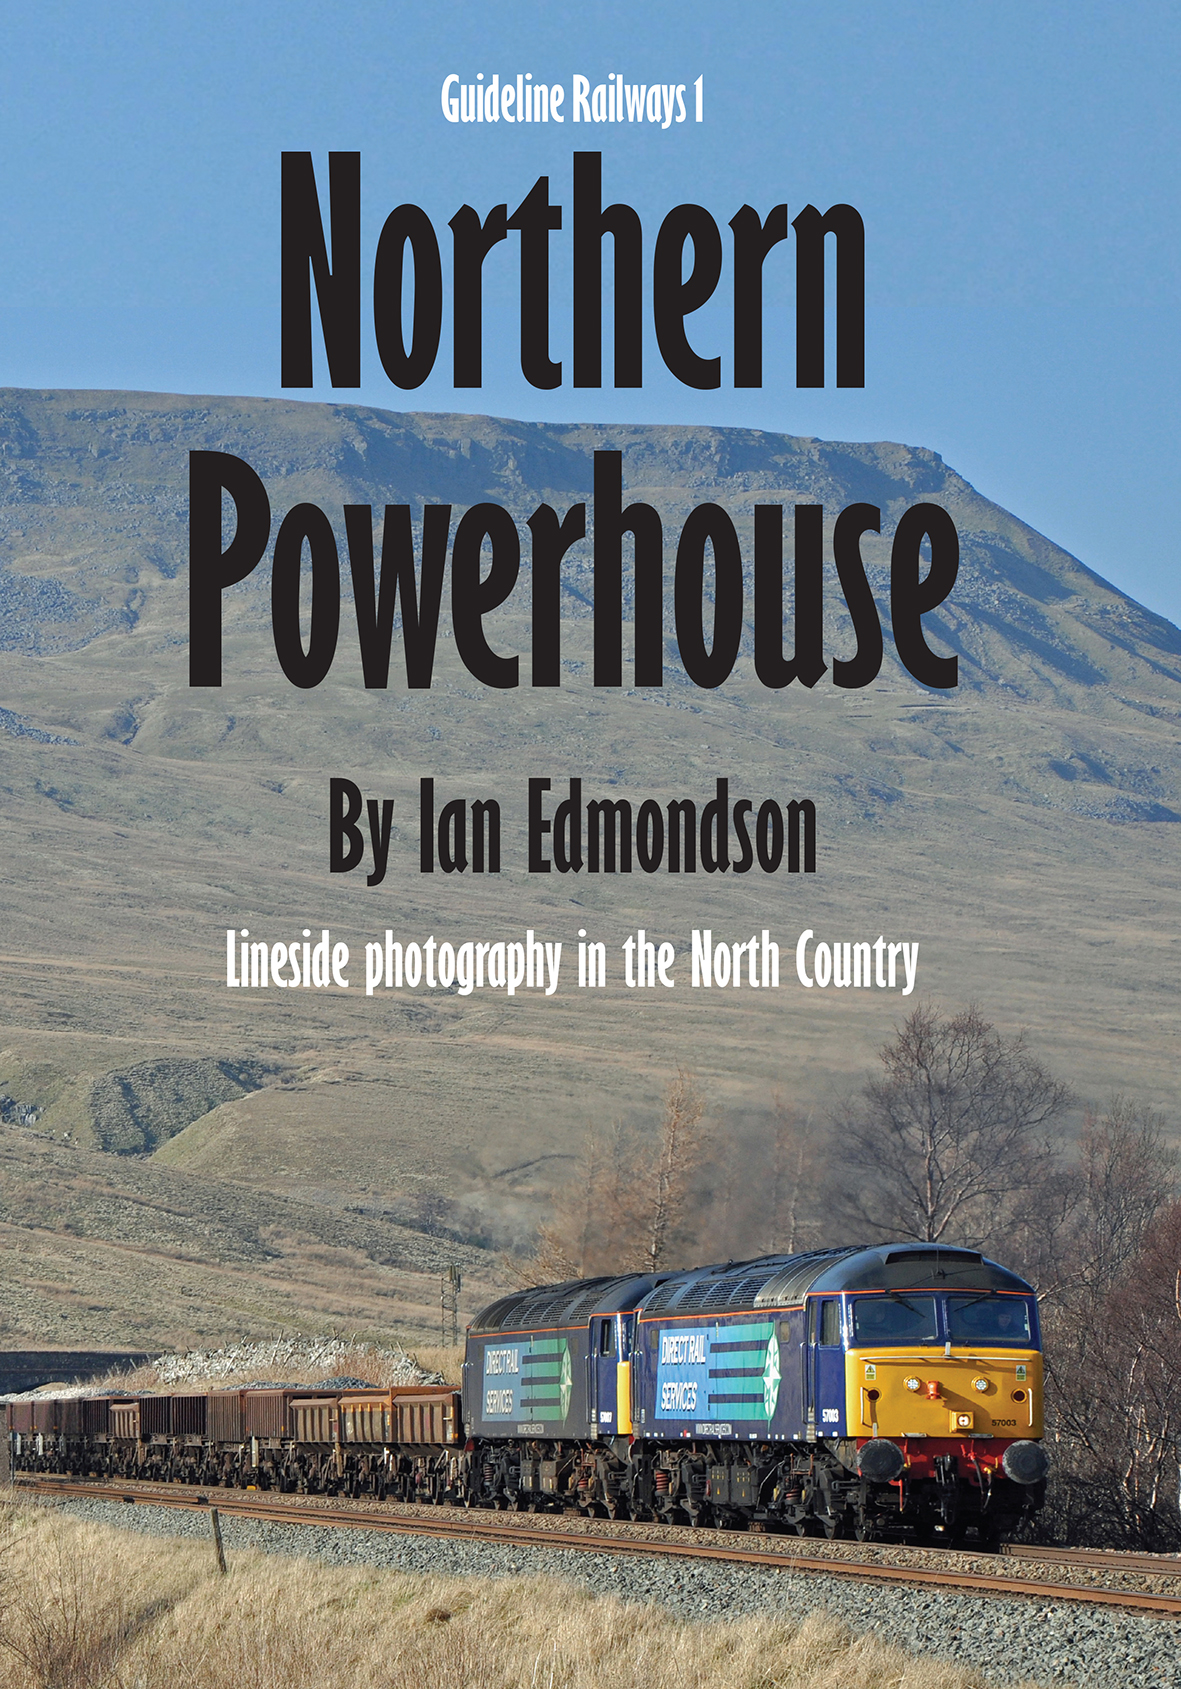 Guideline Publications Ltd Northern Powerhouse - Lineside photography in the North Country NEW bookazine from Guidelinepublications 